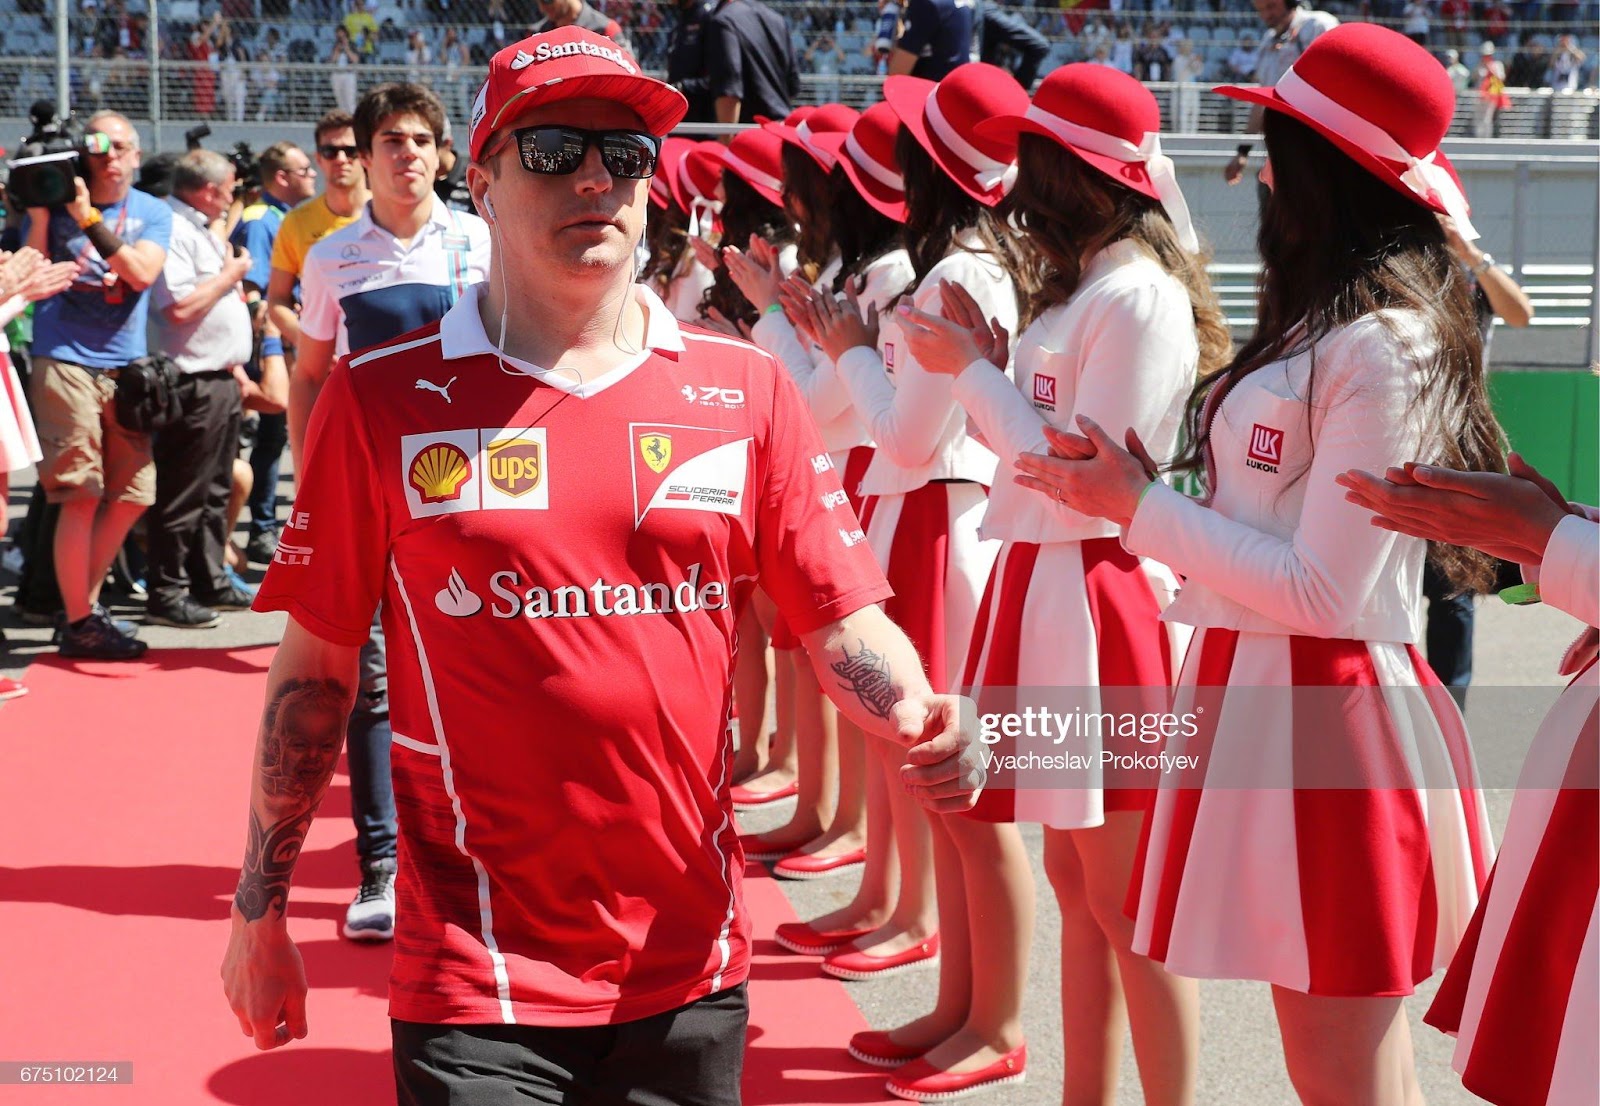 Kimi Raikkonen seen during a drivers' track parade ahead of the 2017 Formula One Russian Grand Prix at the Sochi Autodrom racing circuit.